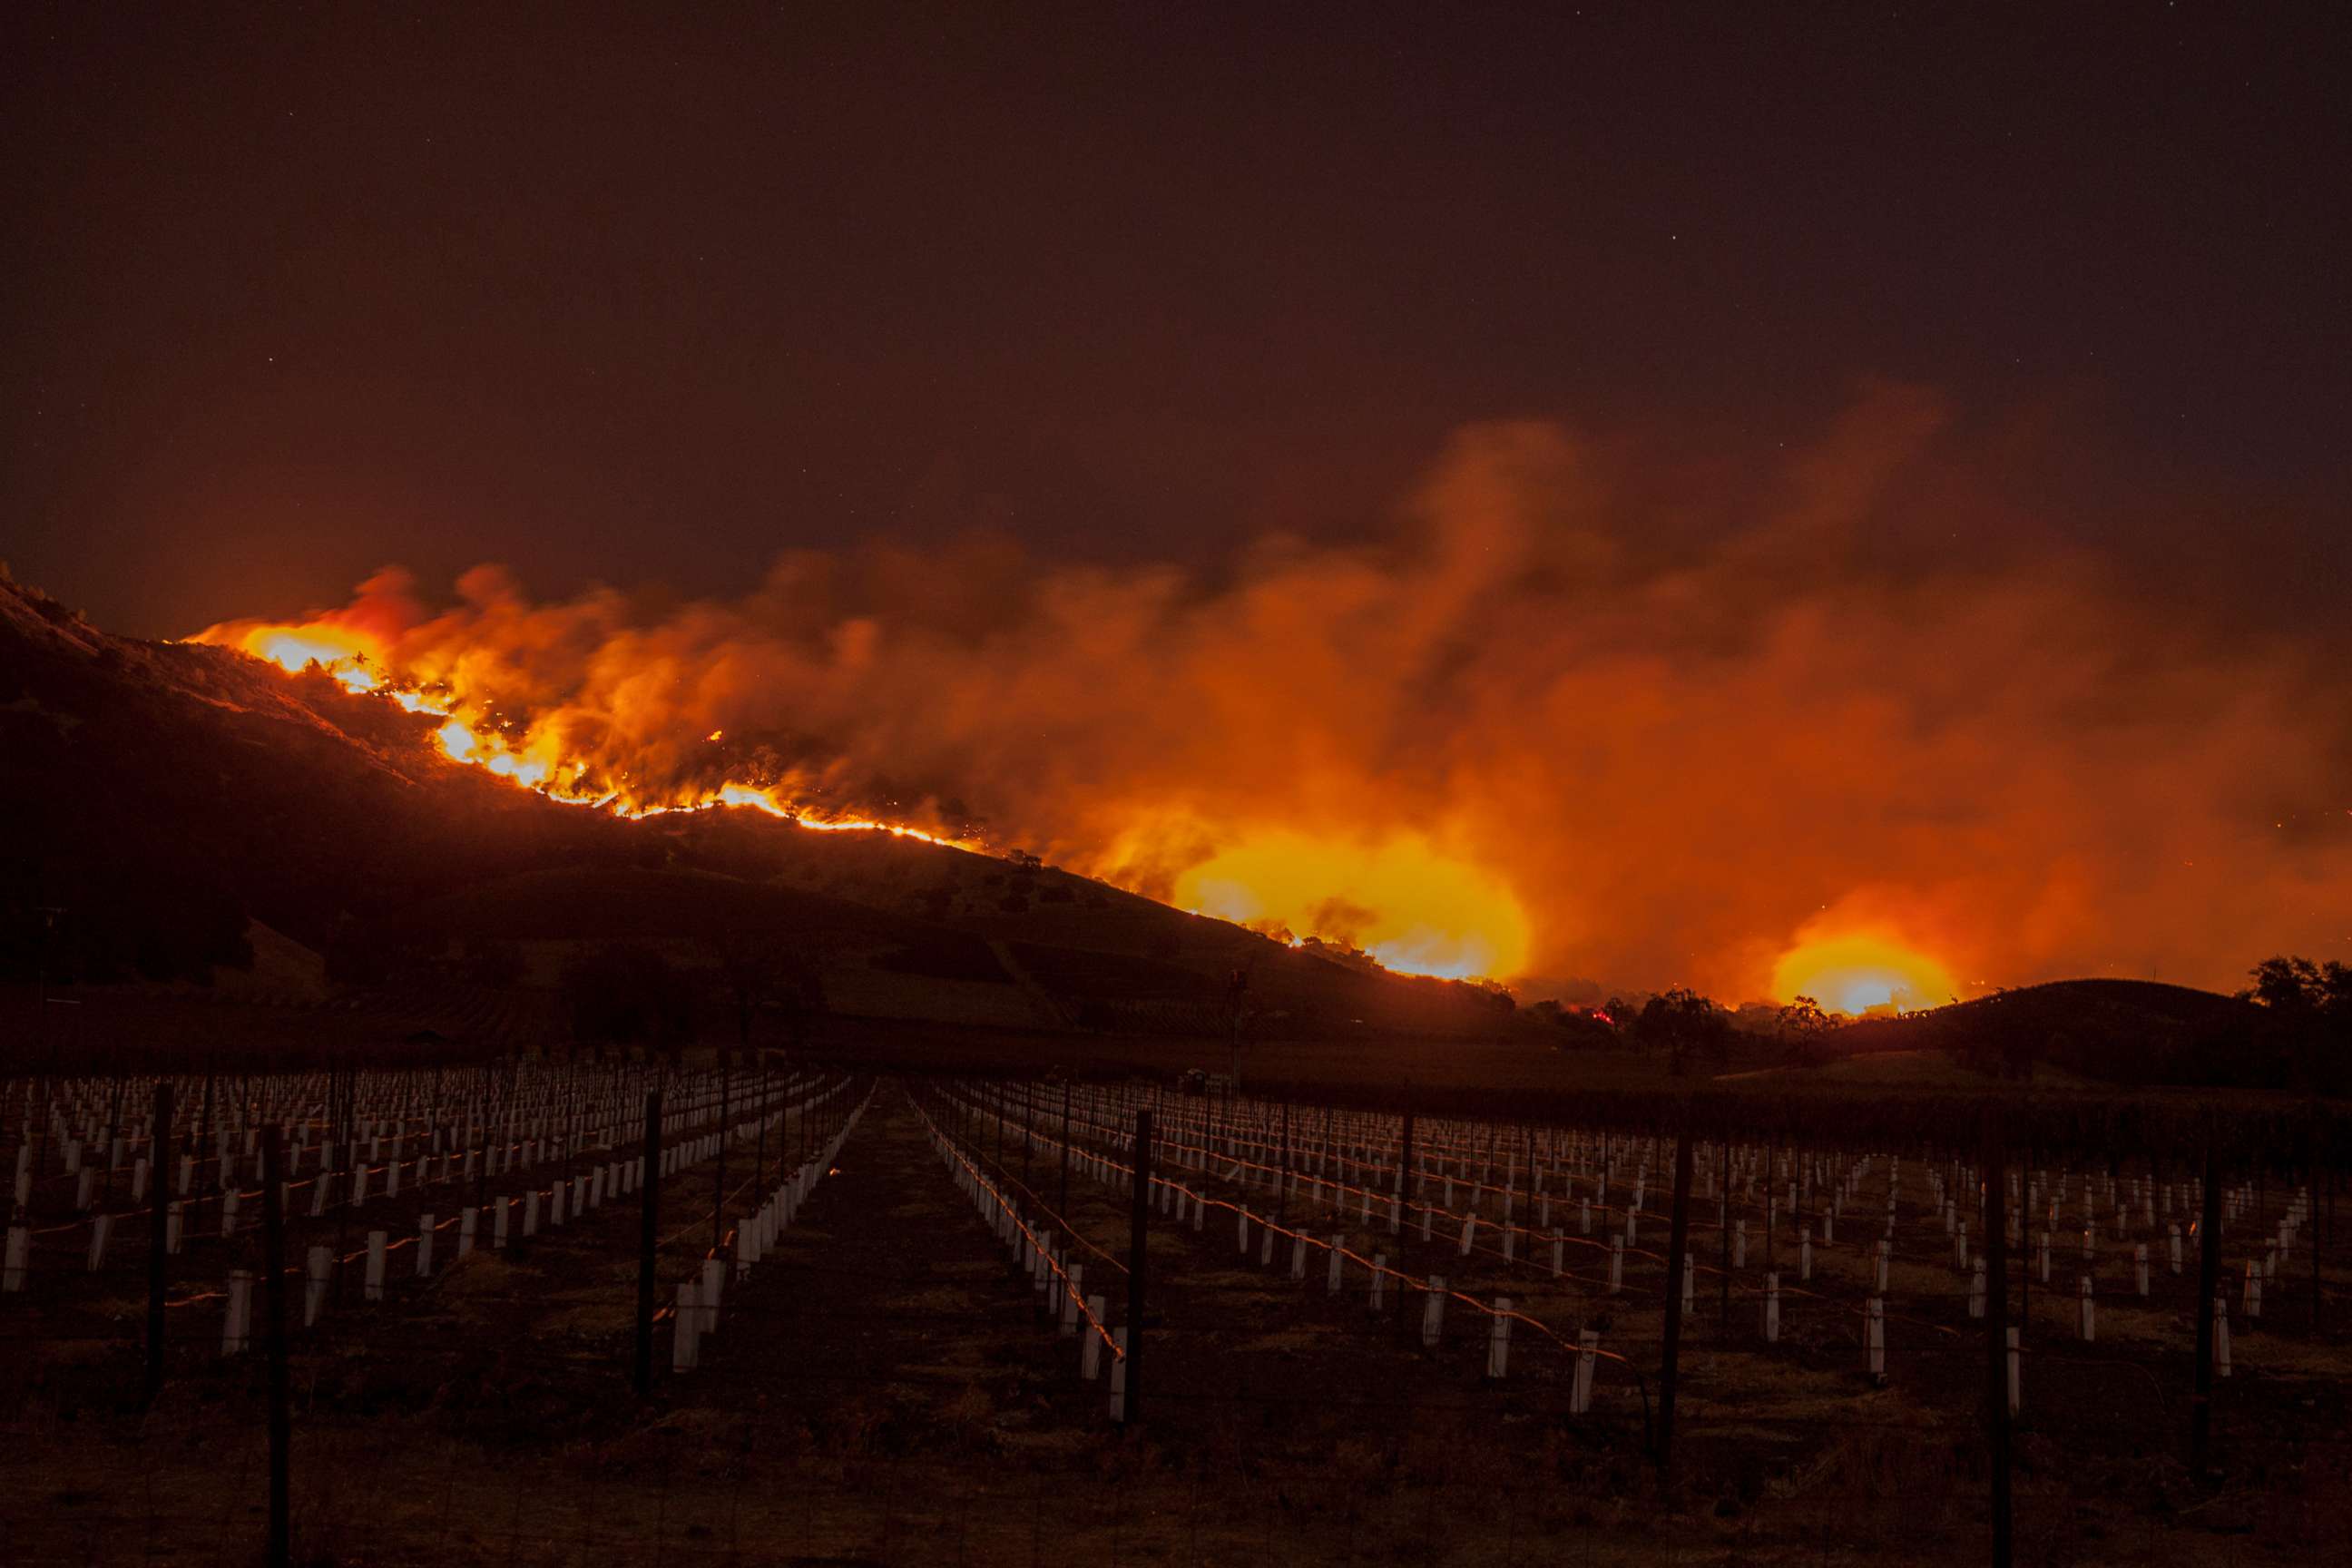 PHOTO: Flames moved through the hills above the Silverado Trail as a wildfire raged through the Napa/Sonoma wine region, Oct. 9, 2017. 